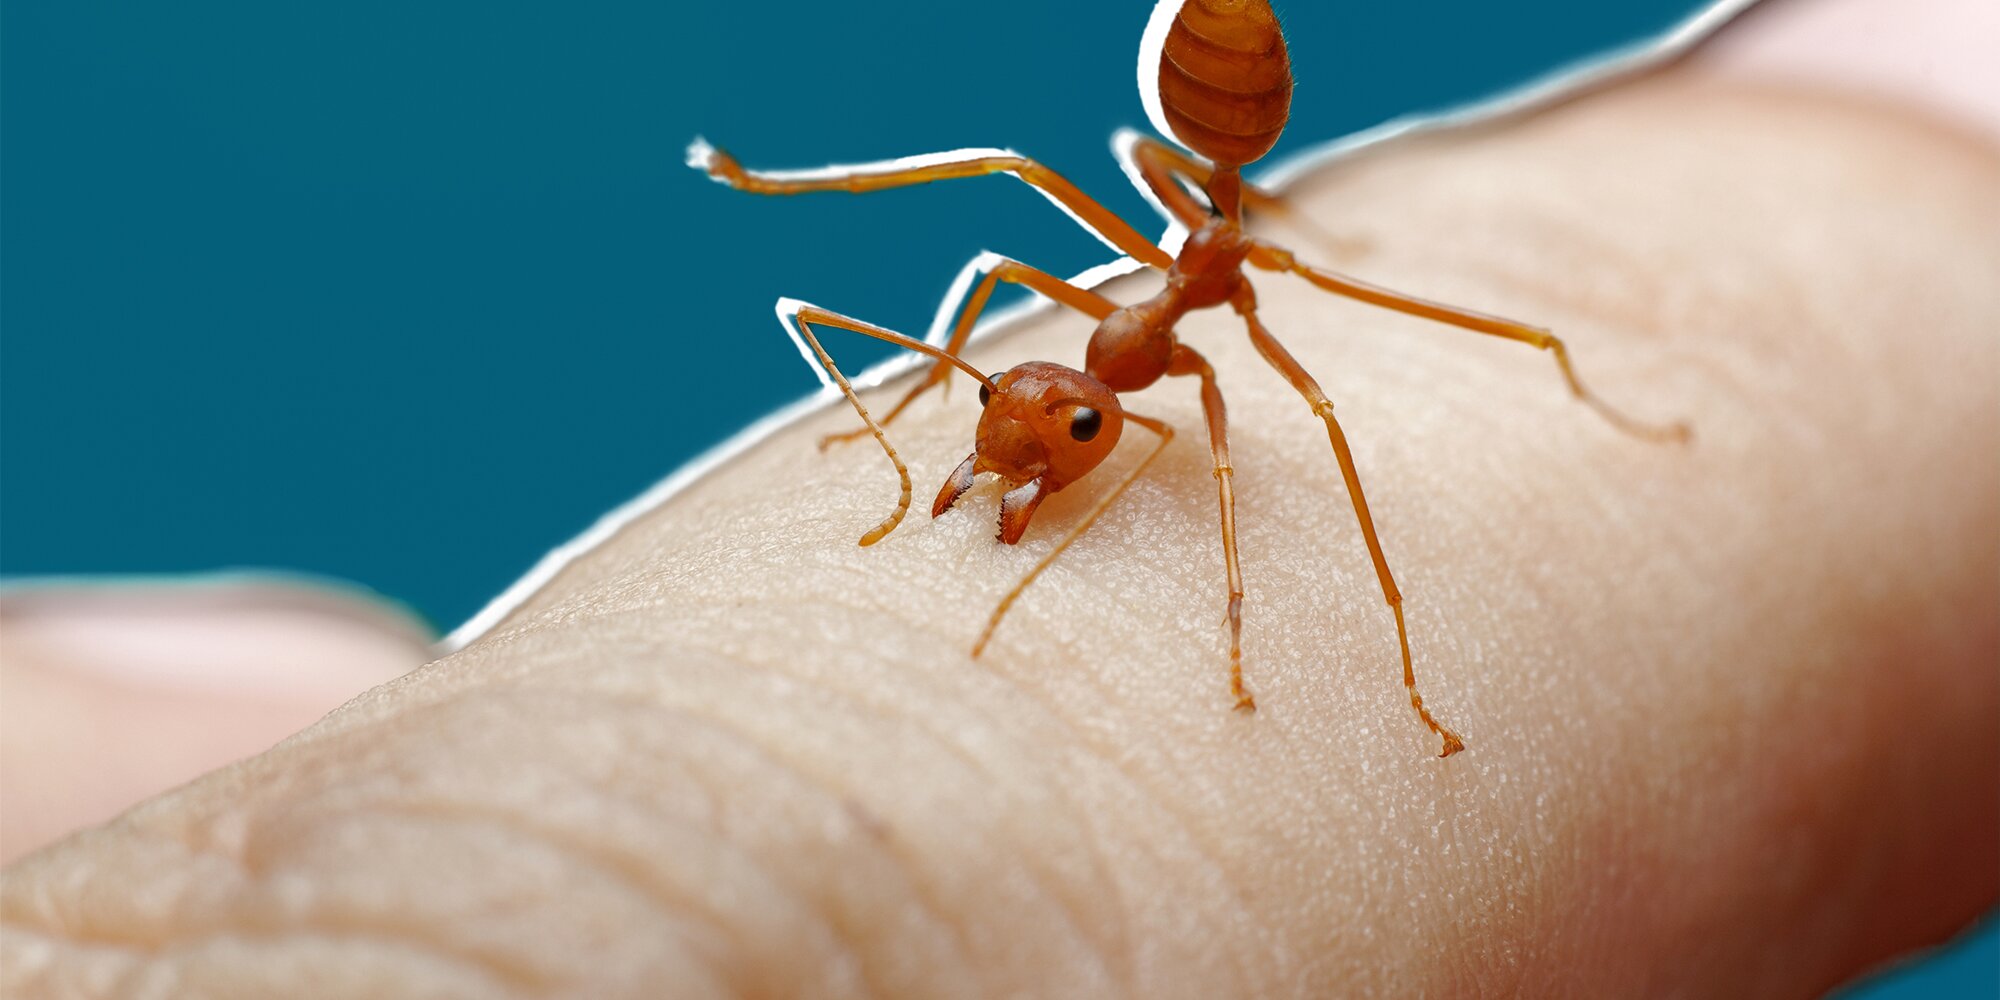 Everything You Need to Know About Ant Bites, According to Experts